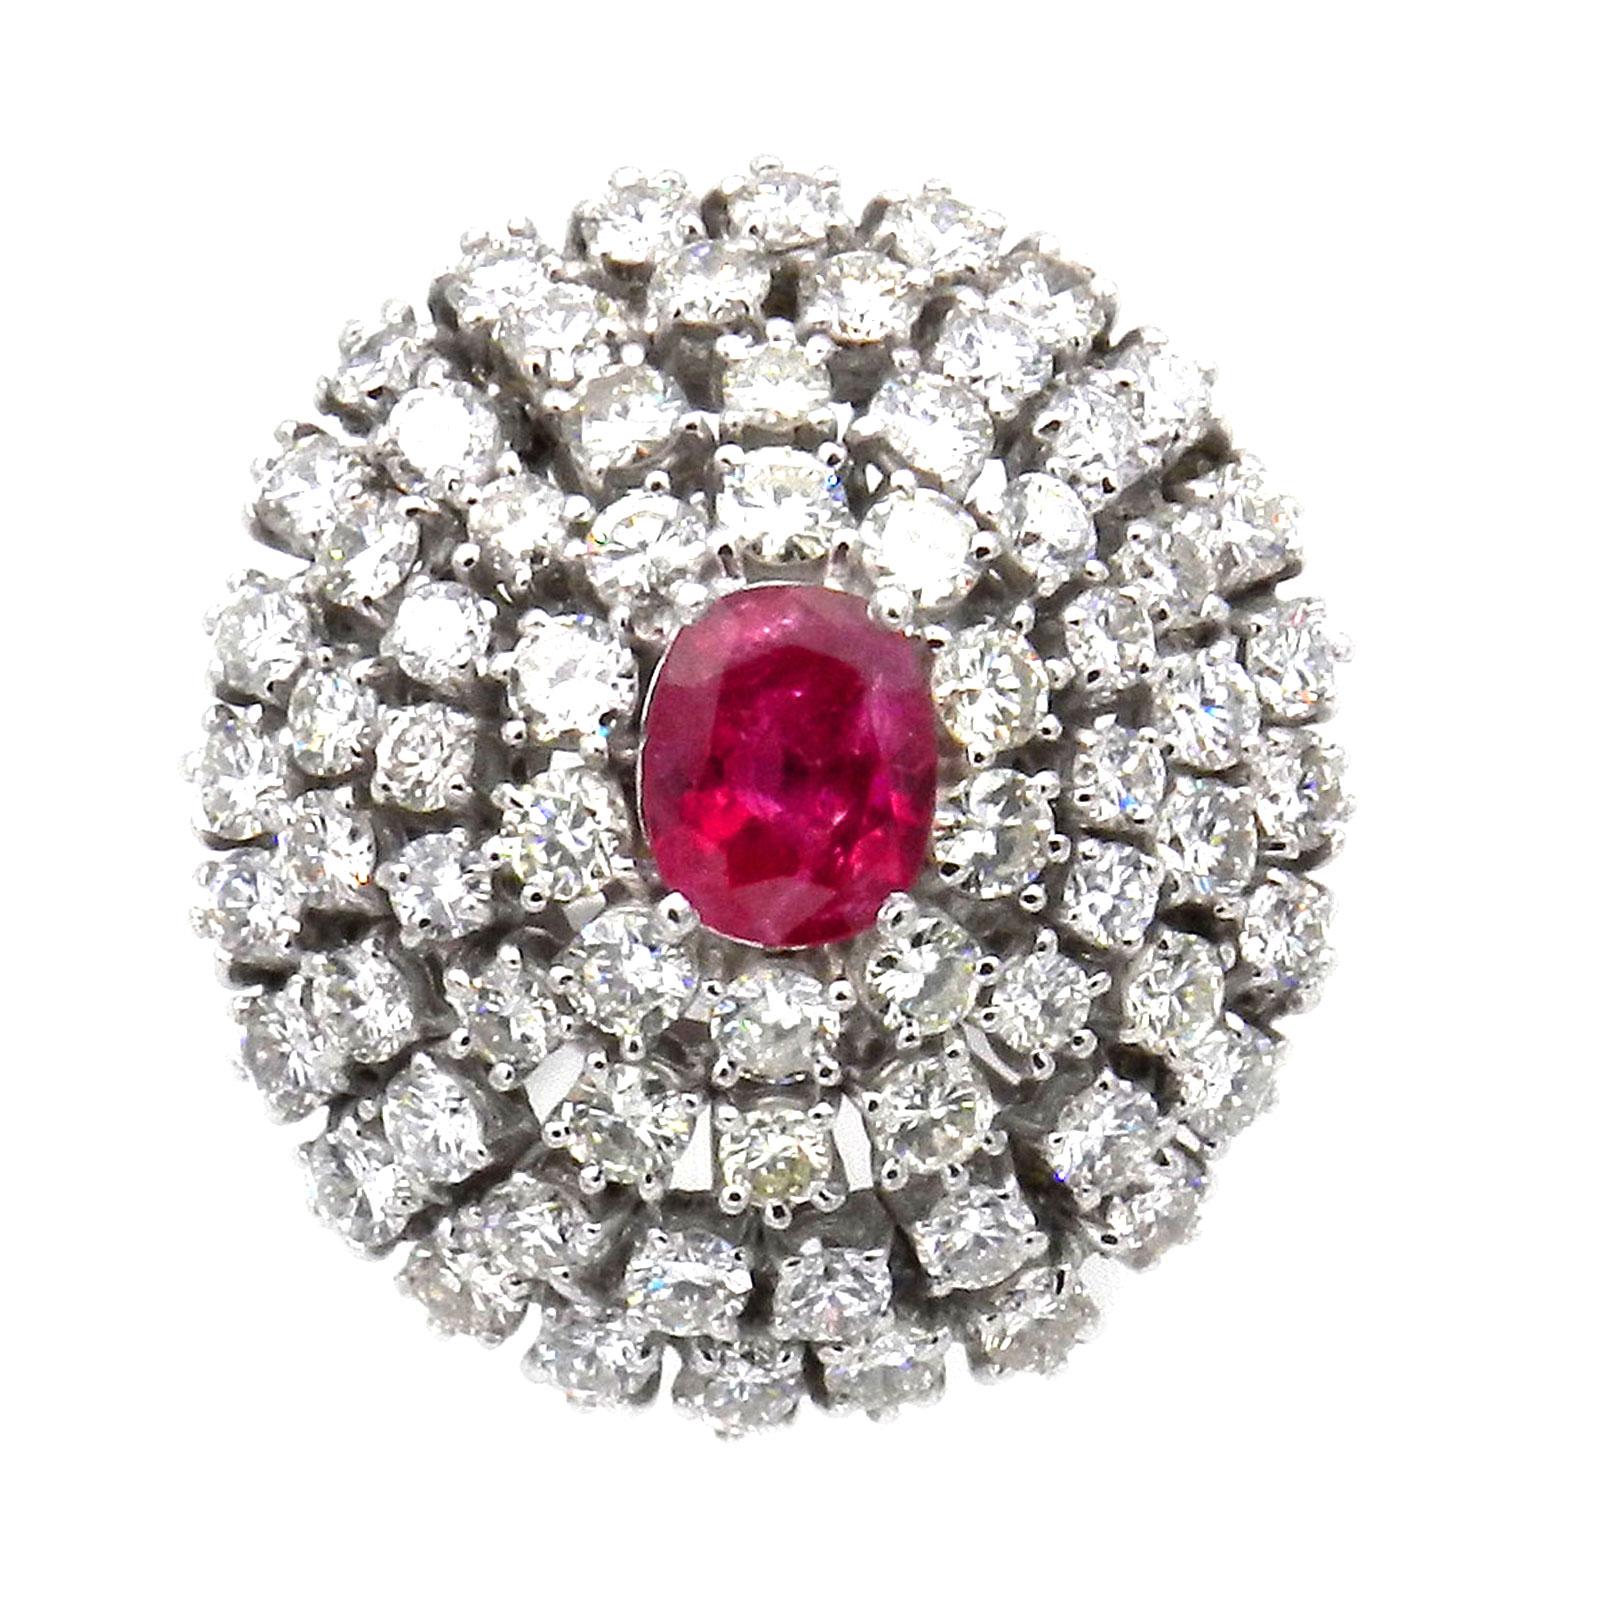 Natural Ruby and 4 Carat Diamond Cocktail Ring in 18K White Gold

This impressive estate cocktail ring is crafted in 18K white gold, the opulent domed ring head is set with a natural ruby ​​of 1.4 carat and is surrounded by 70 sparkling brilliant